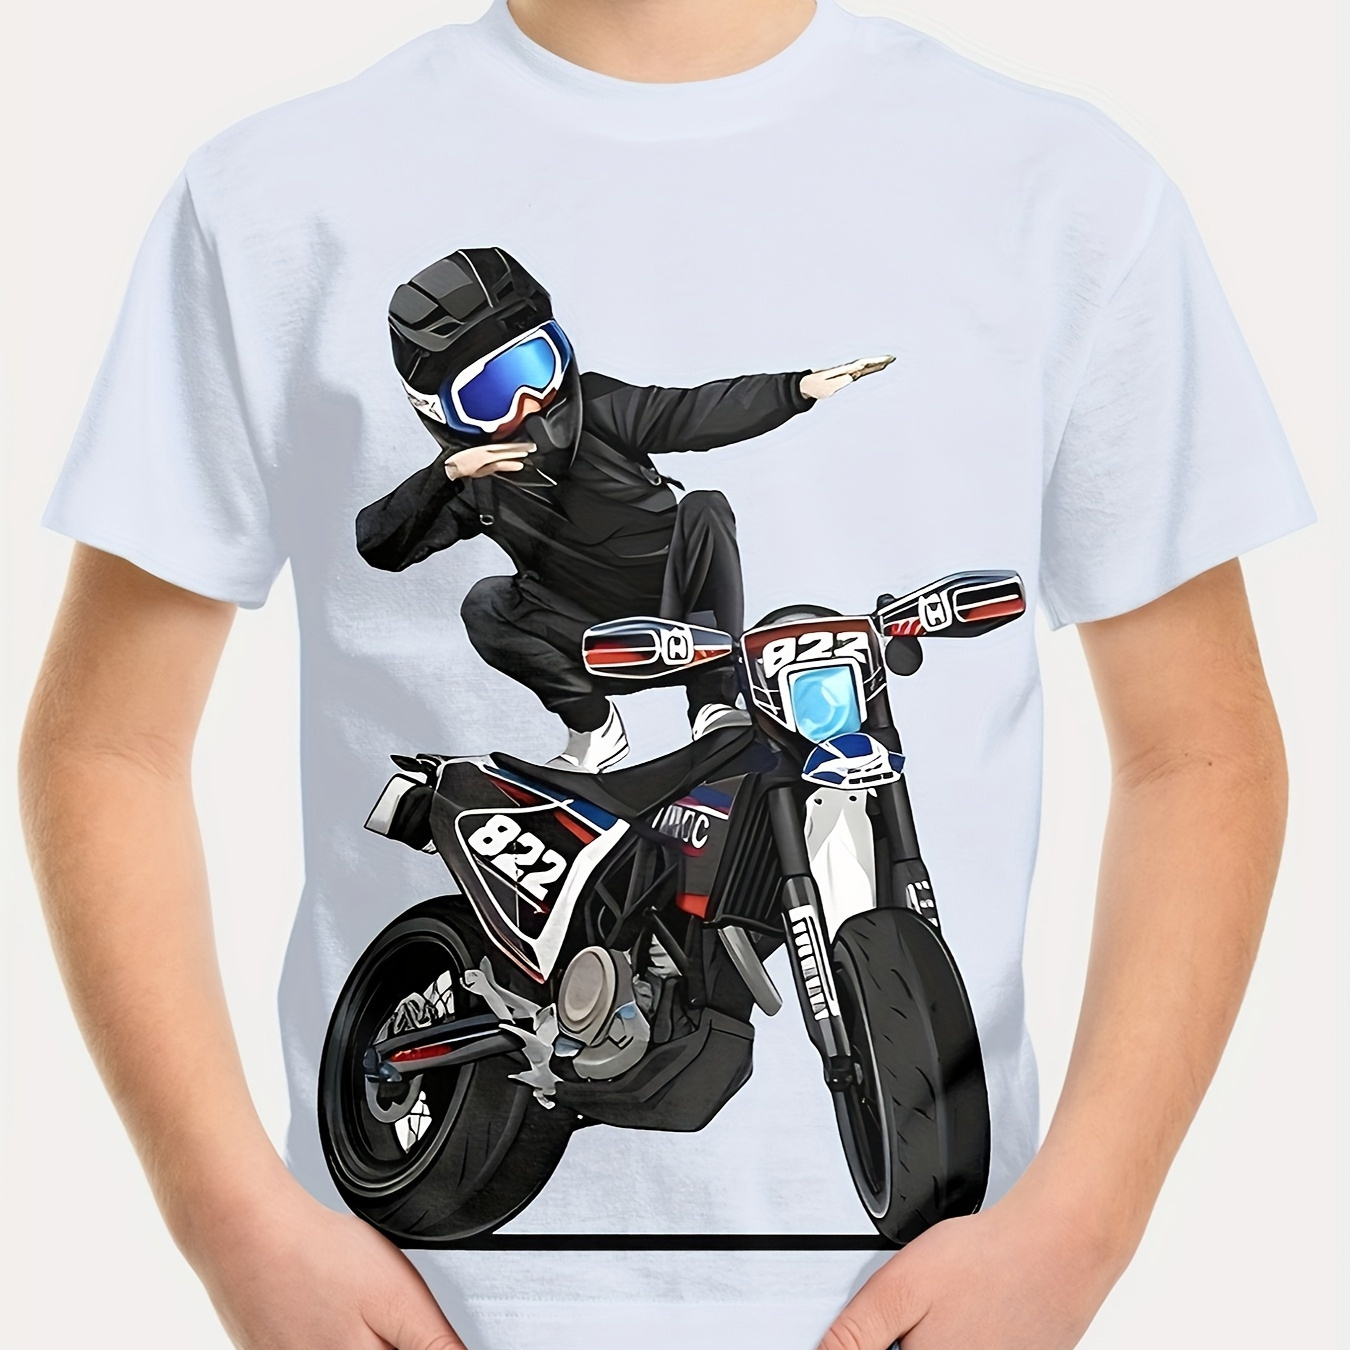 

Cool Motorcycle Rider 3d Print Boys Creative T-shirt, Casual Lightweight Comfy Short Sleeve Tee Tops, Boys Clothes For Summer